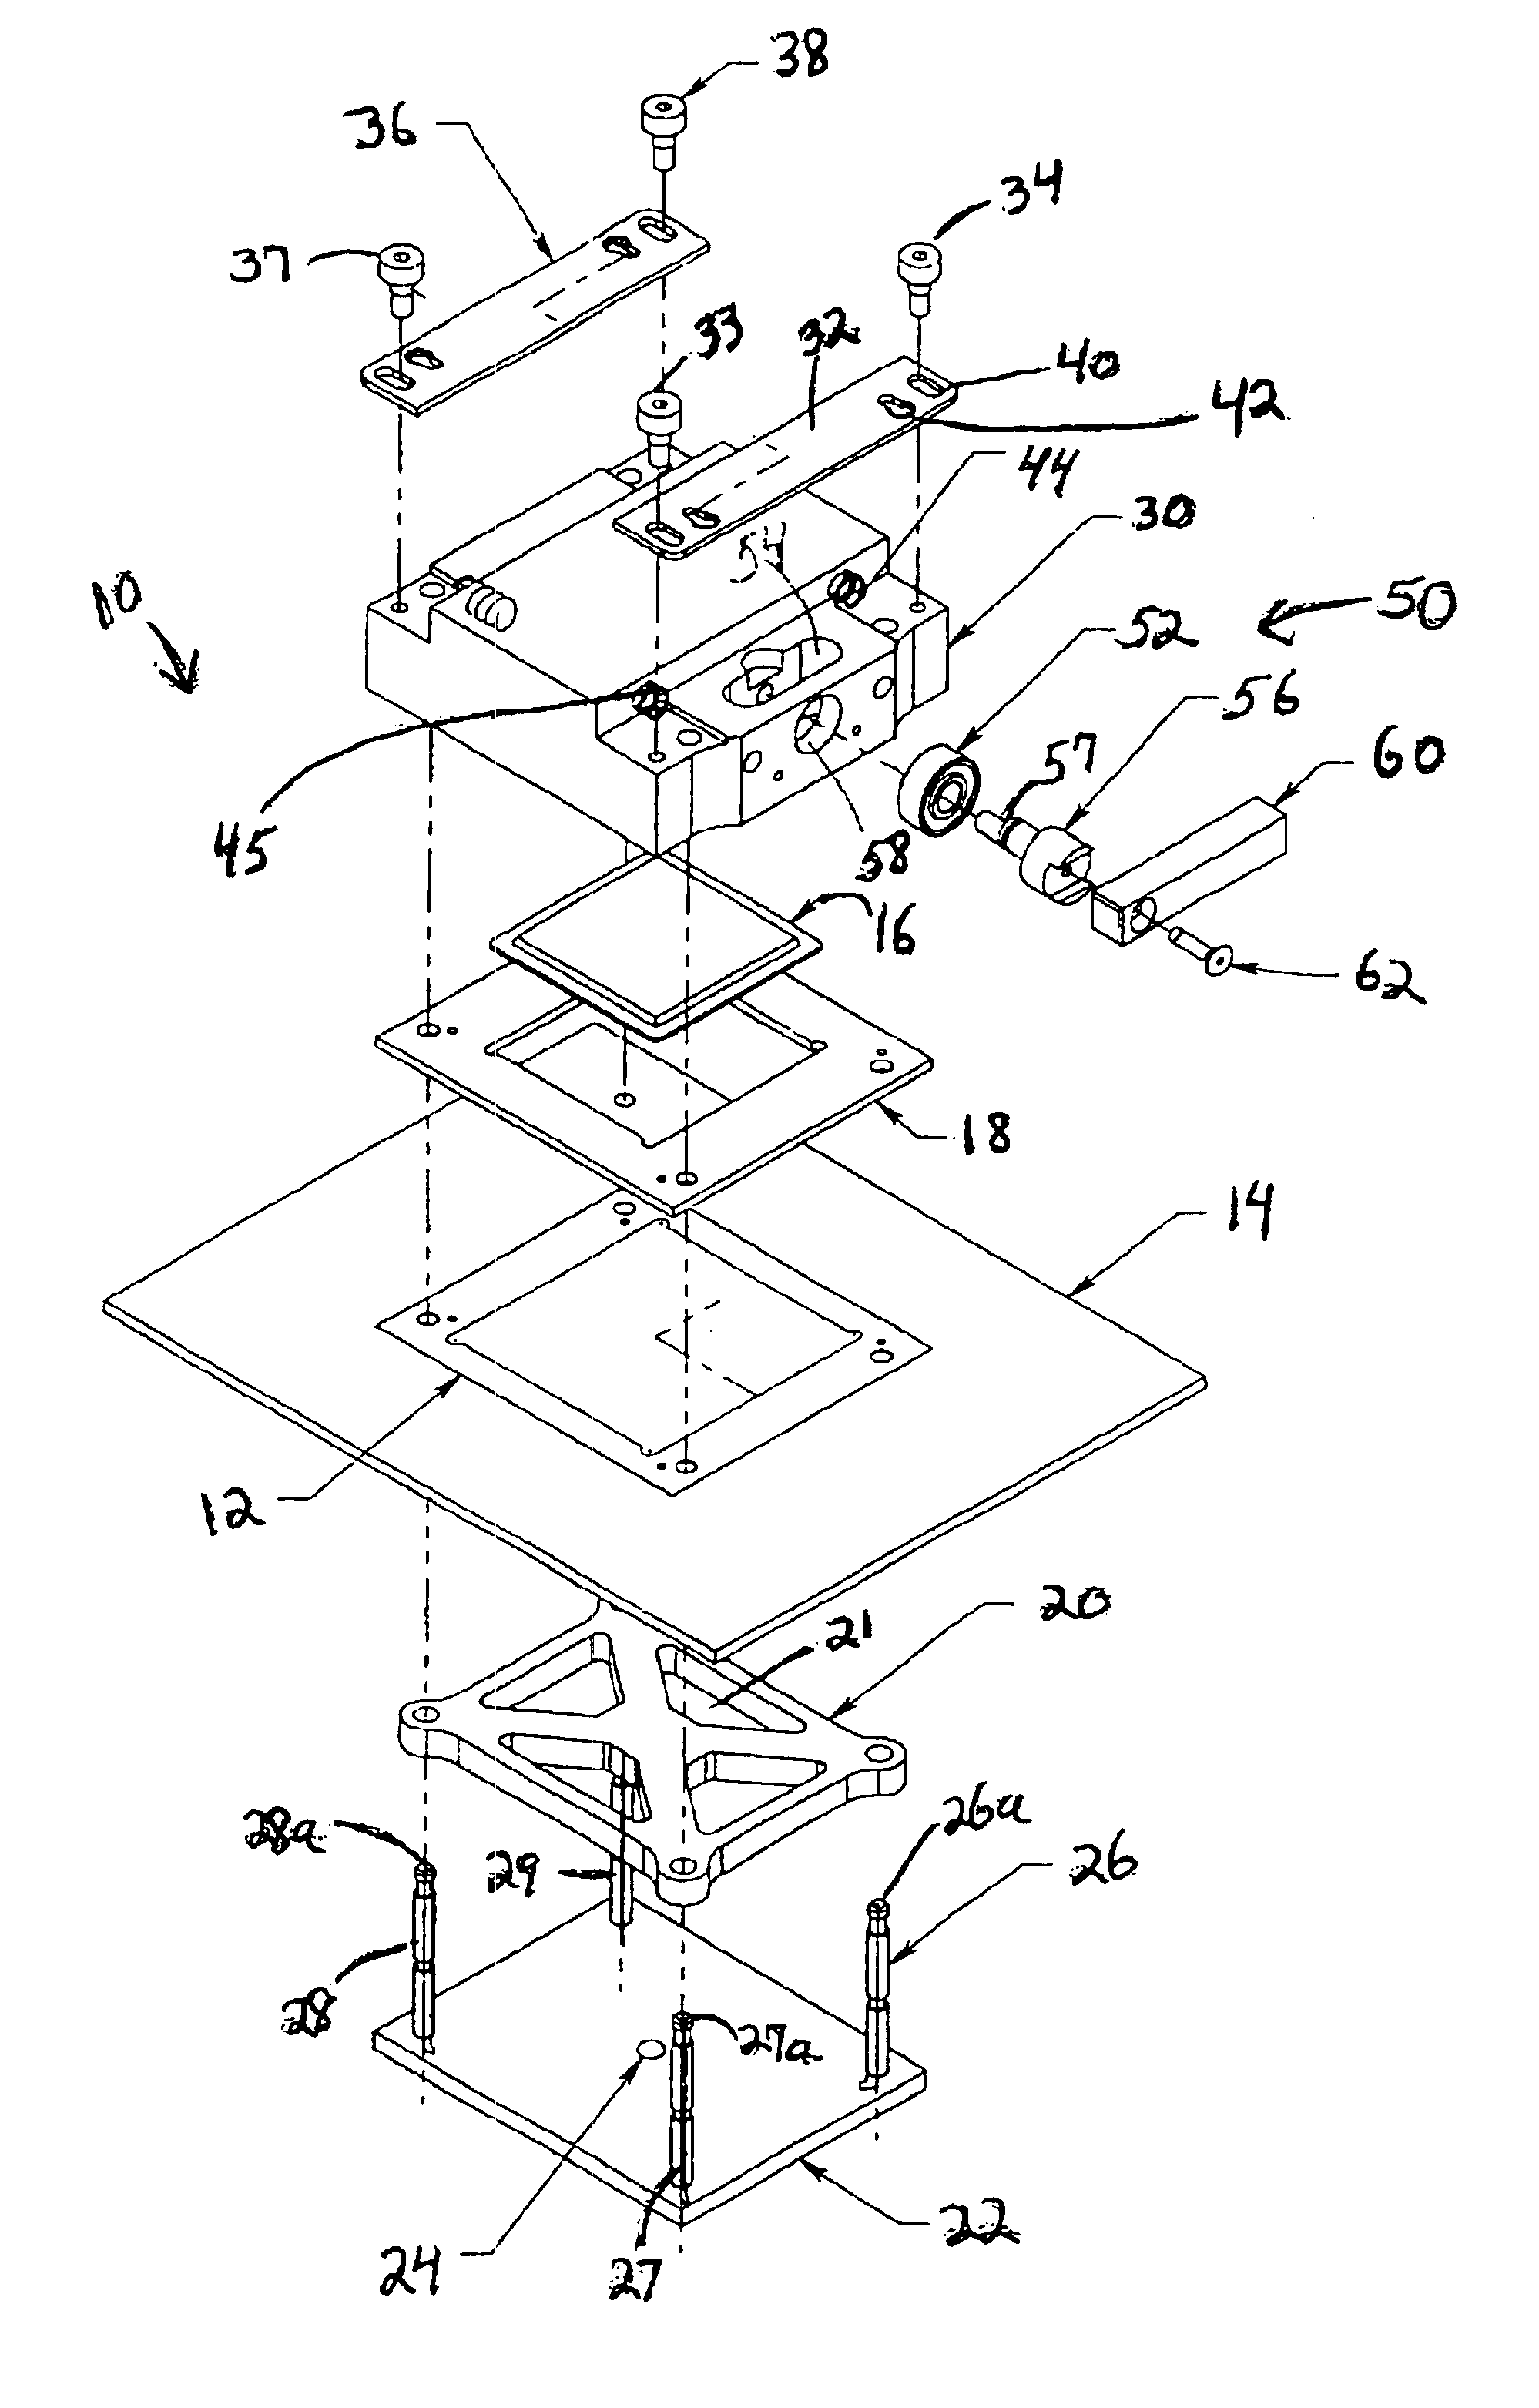 Apparatus for applying a mechanically-releasable balanced compressive load to an assembly such as a compliant anisotropic conductive elastomer electrical connector